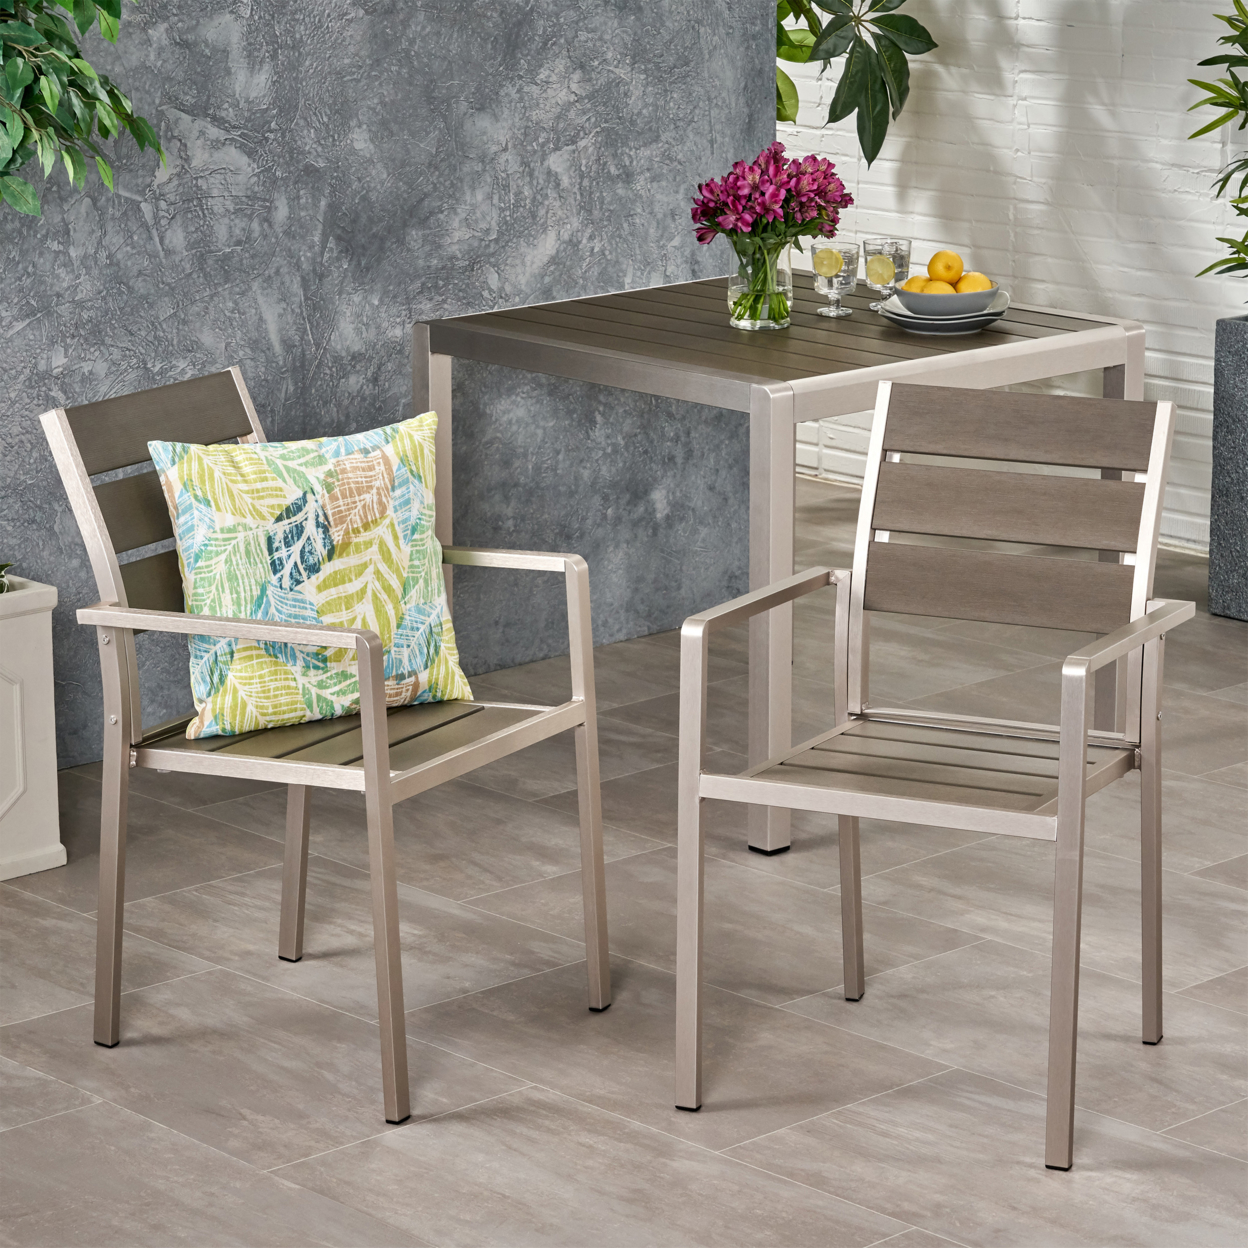 Belle Outdoor Modern Aluminum Dining Chair With Faux Wood Seat (Set Of 2) - Gray + Silver